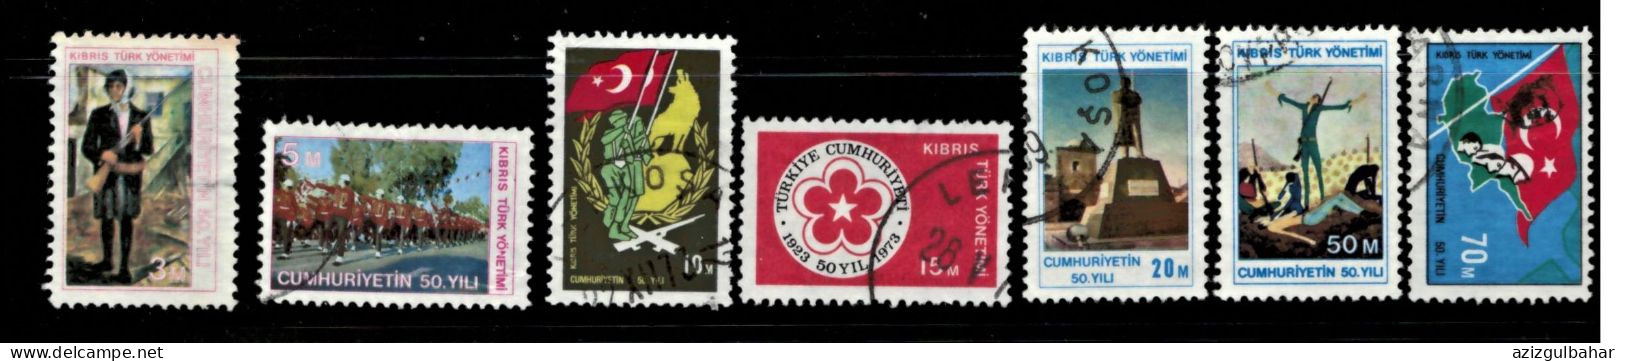 1973 - DEFINITIVE SERIES  - TURKISH  CYPRUS STAMPS - USED - Oblitérés